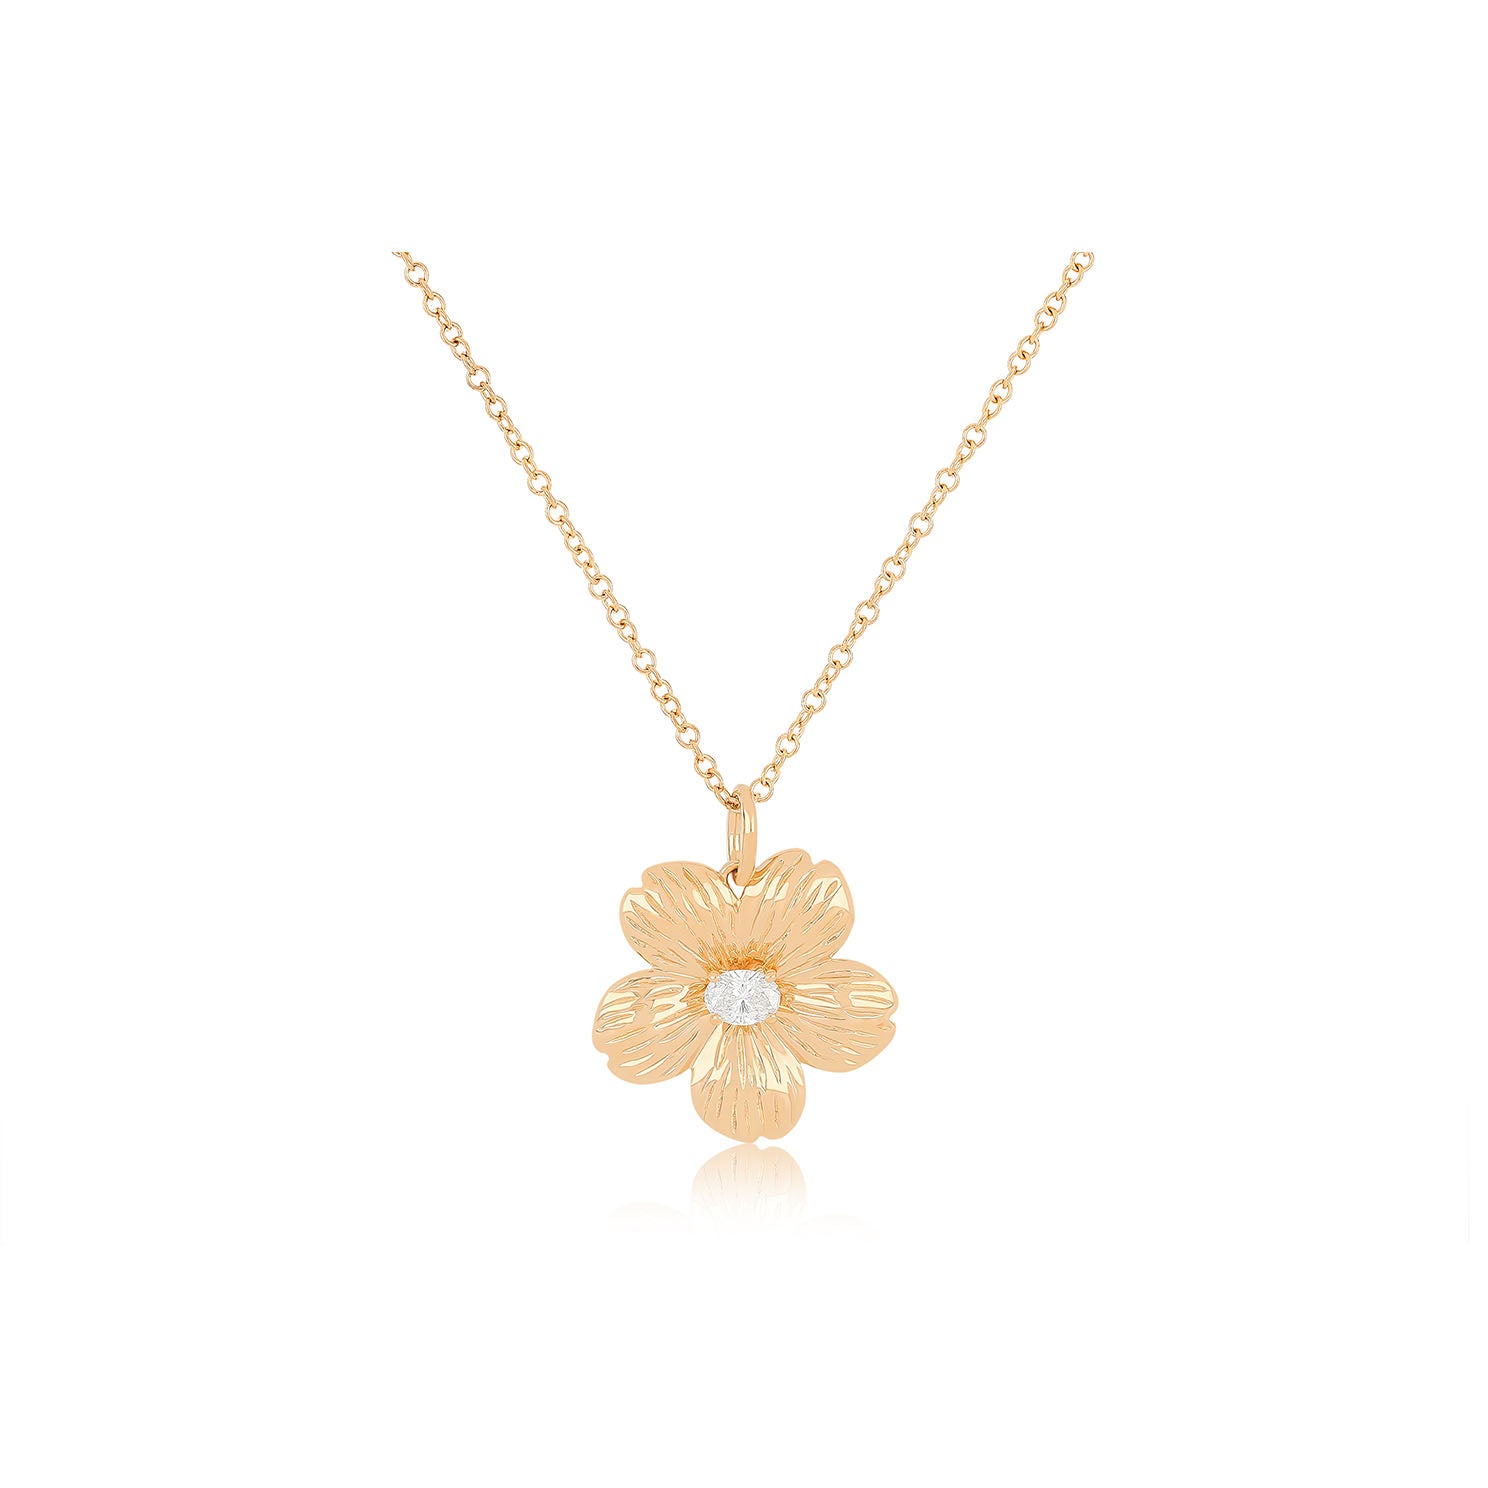 Cherry Blossom Necklace in 14k rose gold